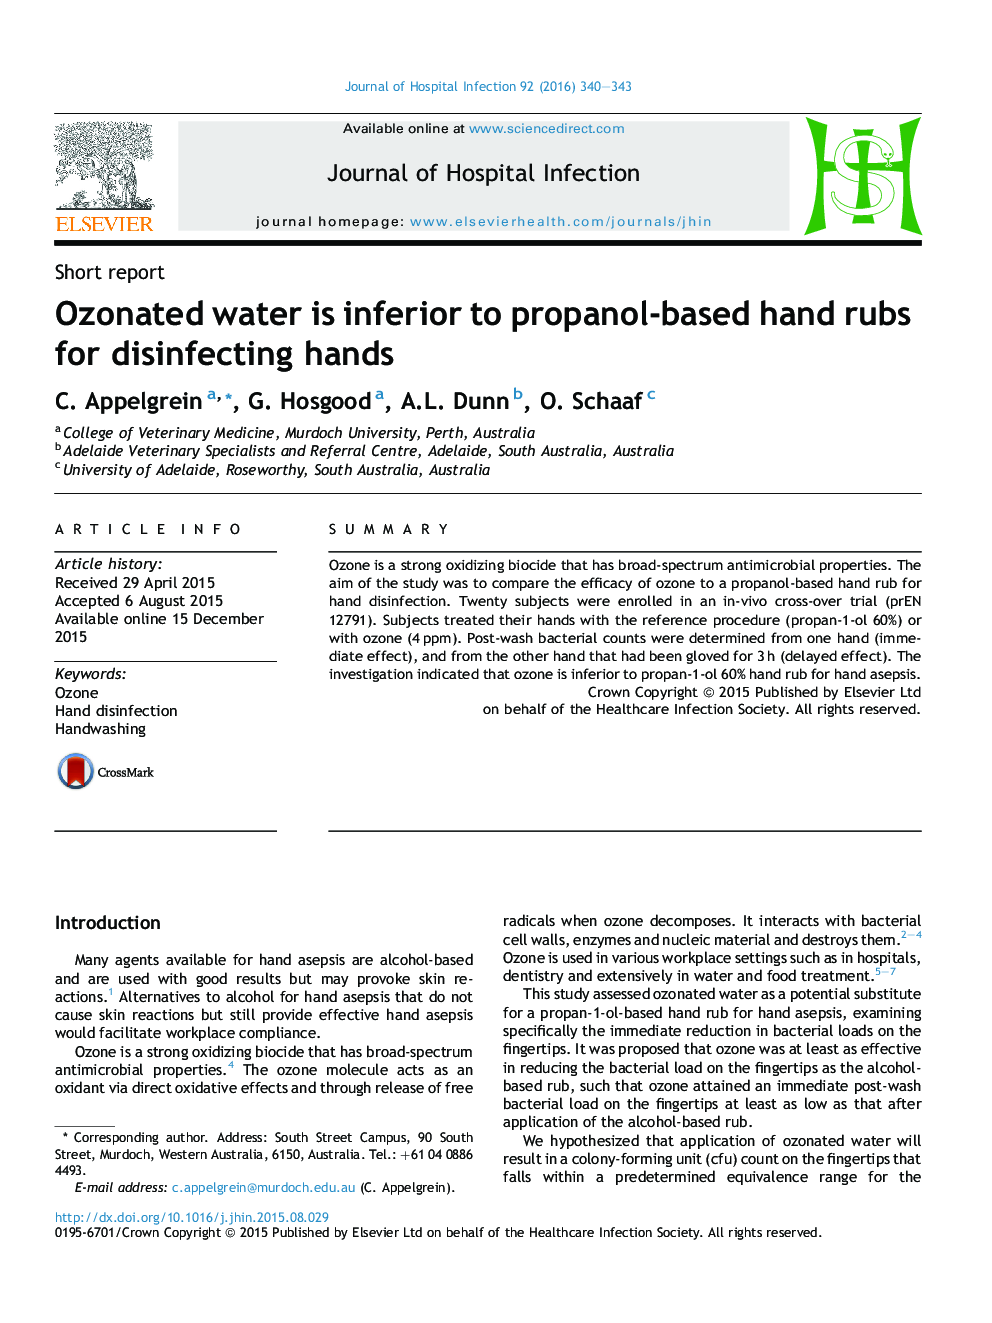 Ozonated water is inferior to propanol-based hand rubs for disinfecting hands